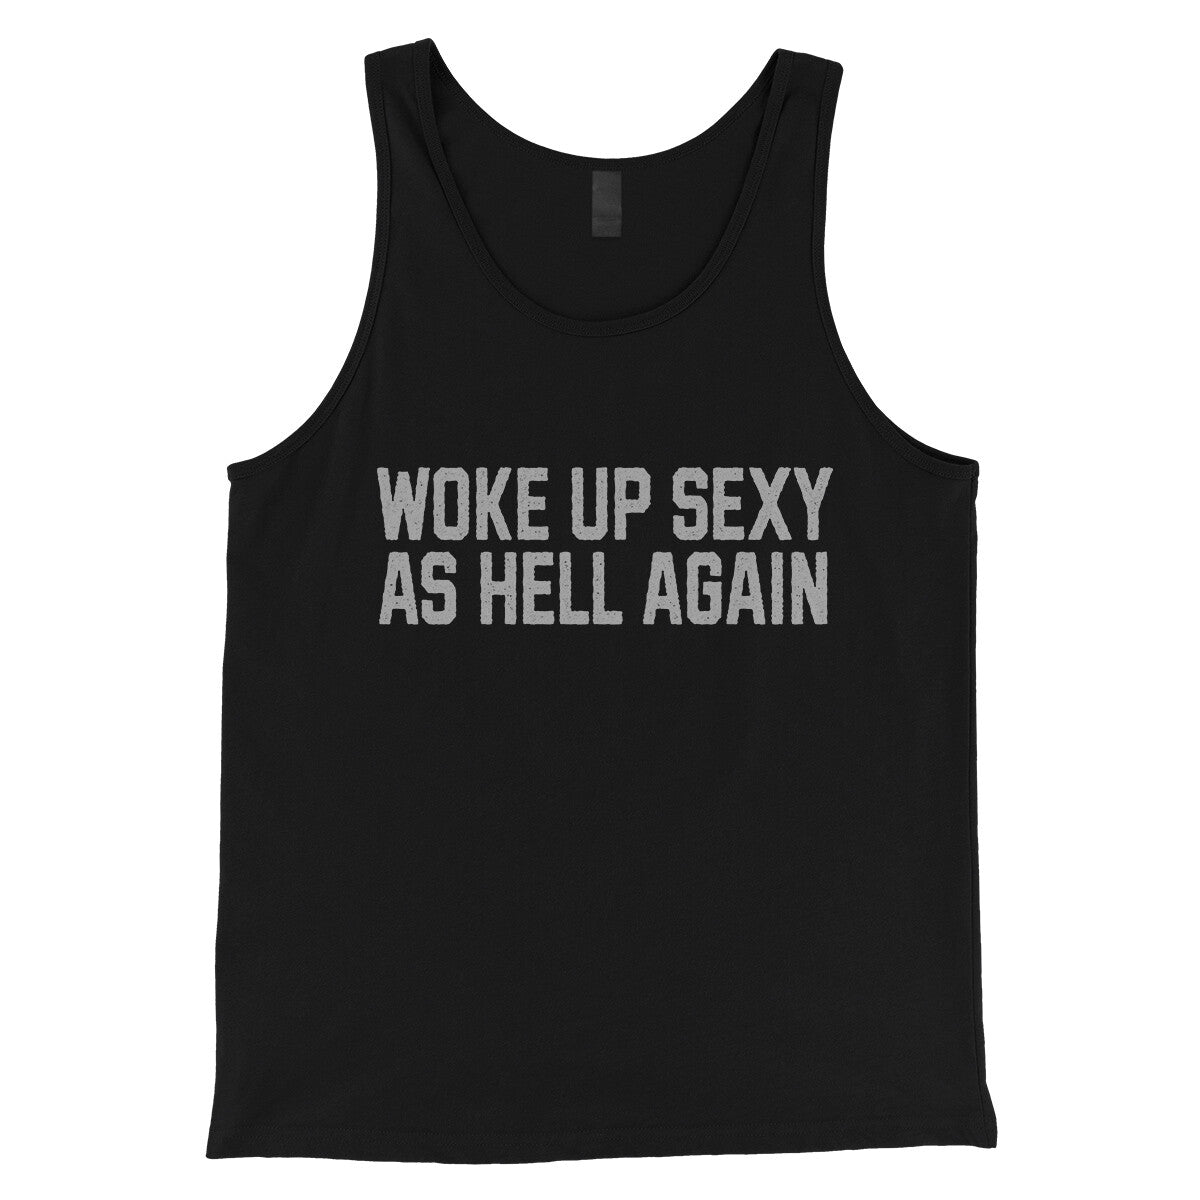 Woke Up Sexy as Hell in Black Color